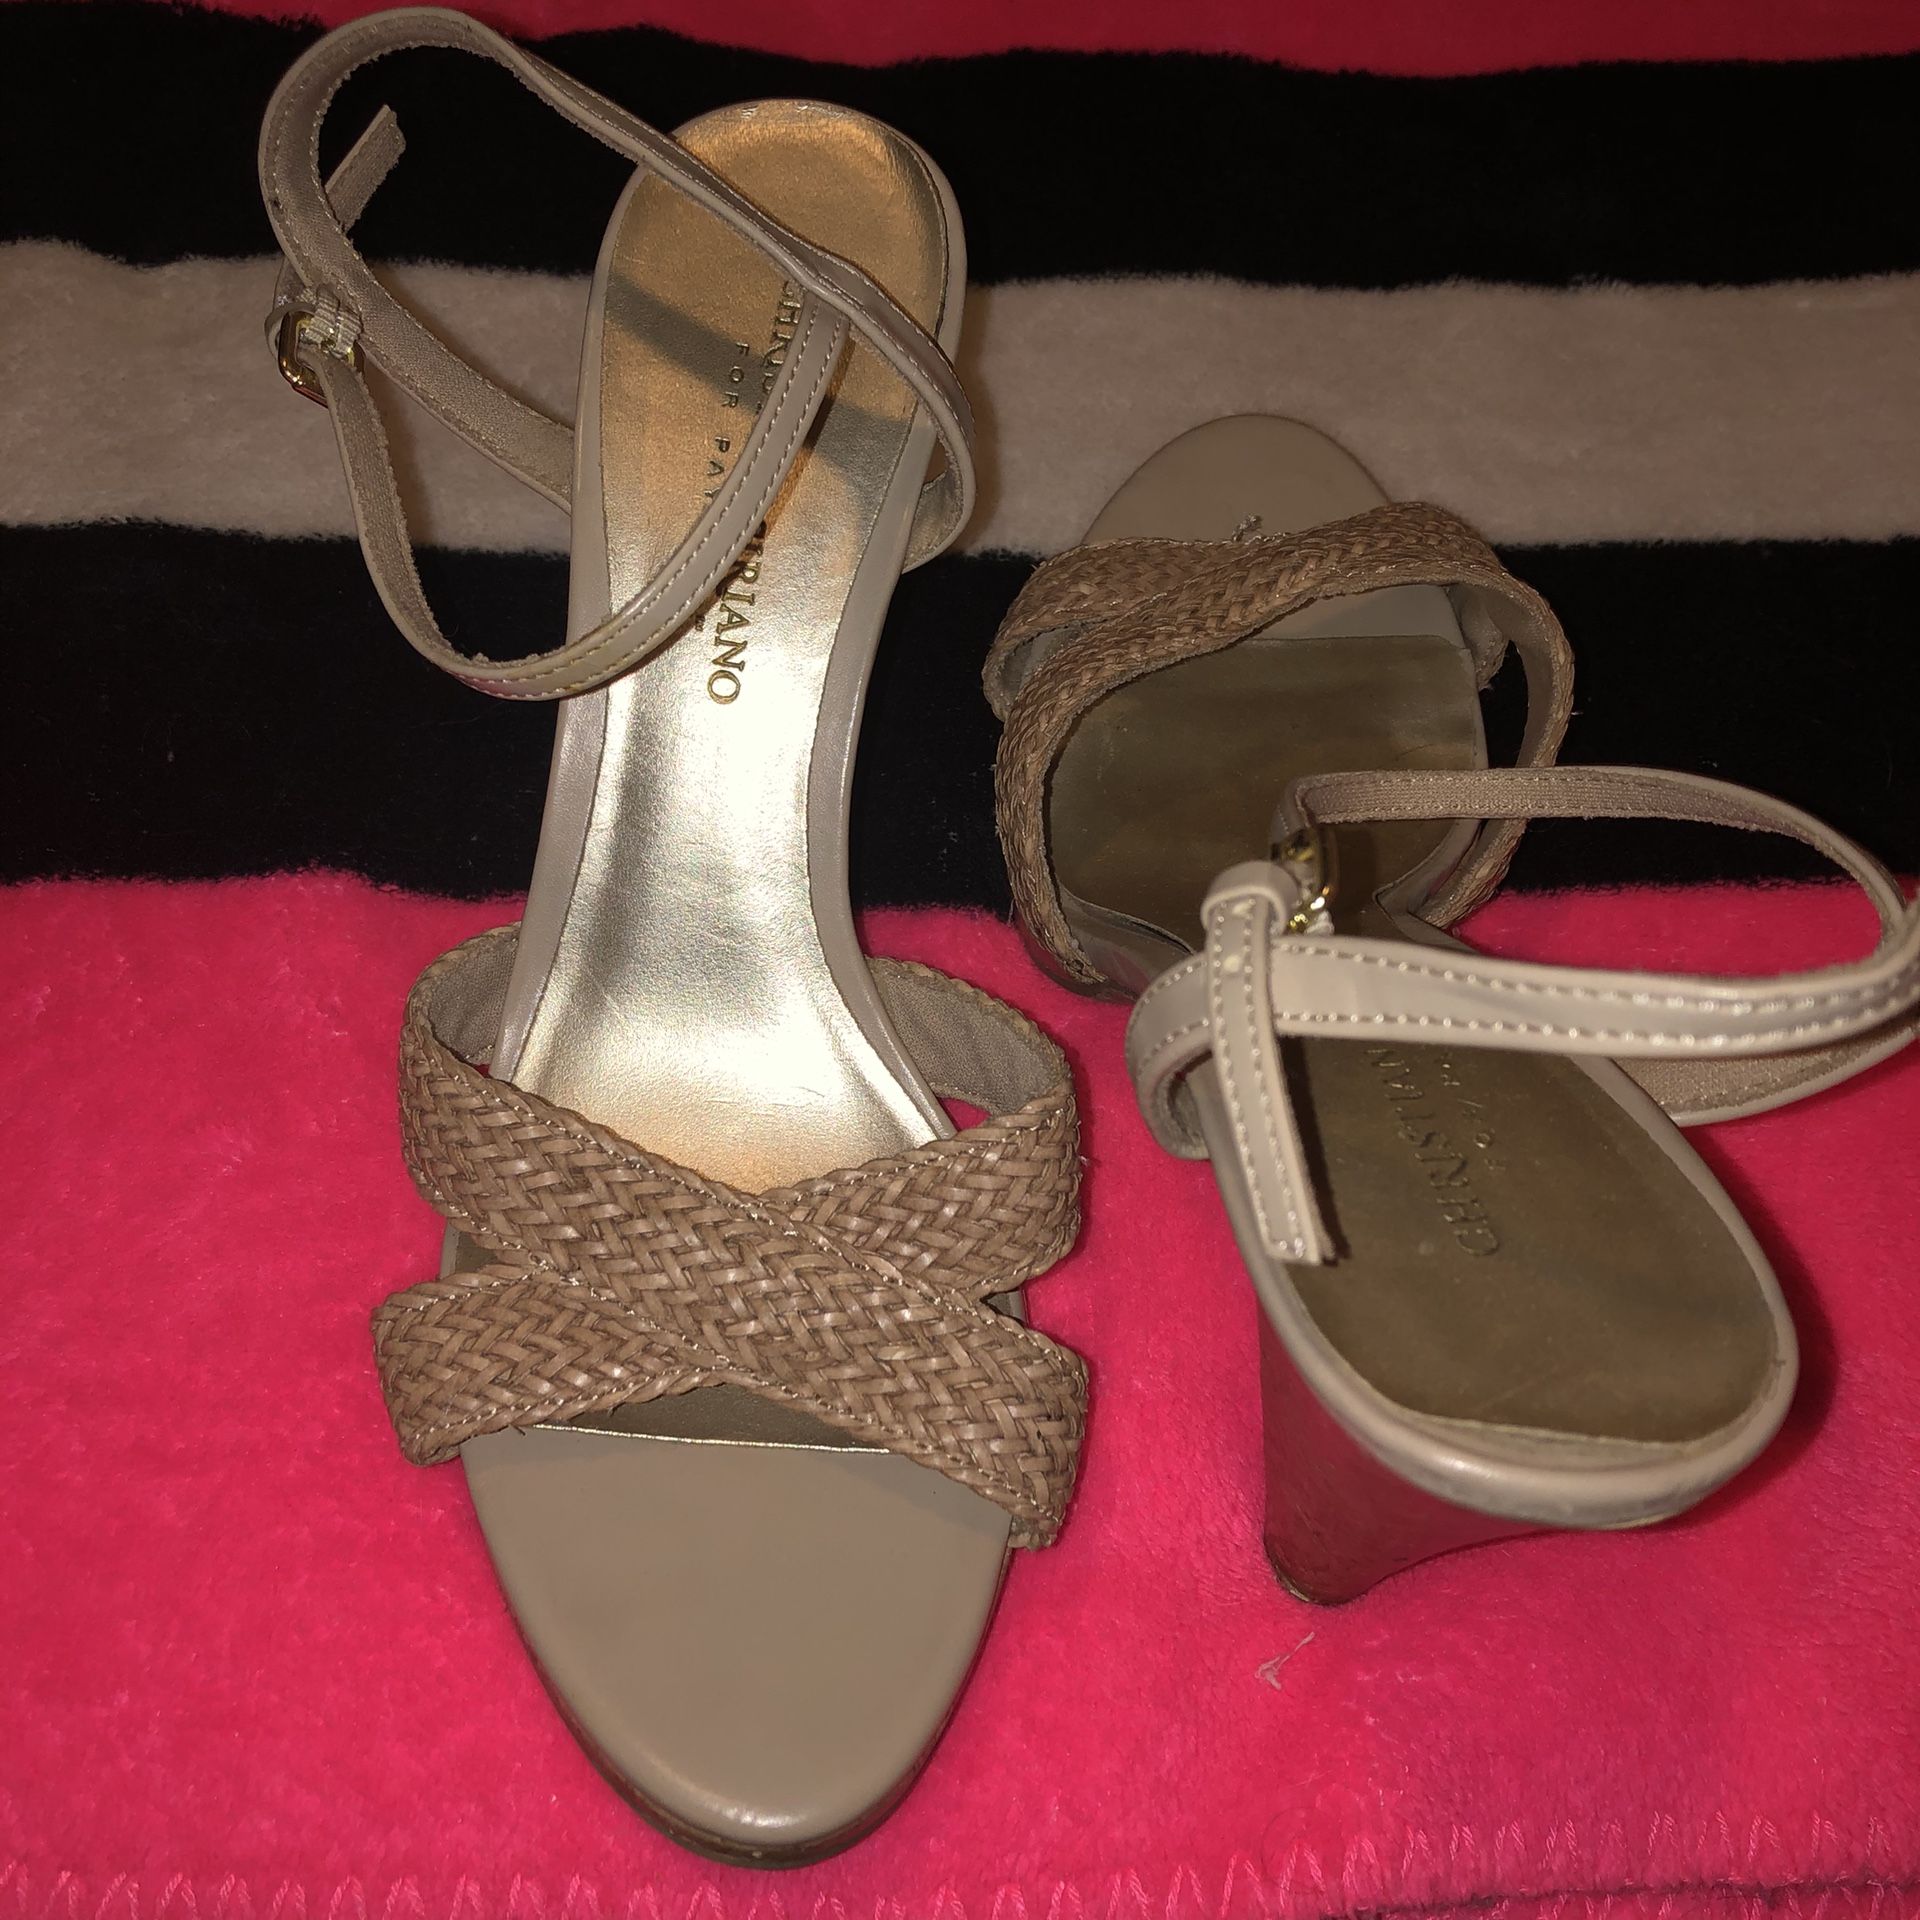 Size 8 Tan Strappy Heel